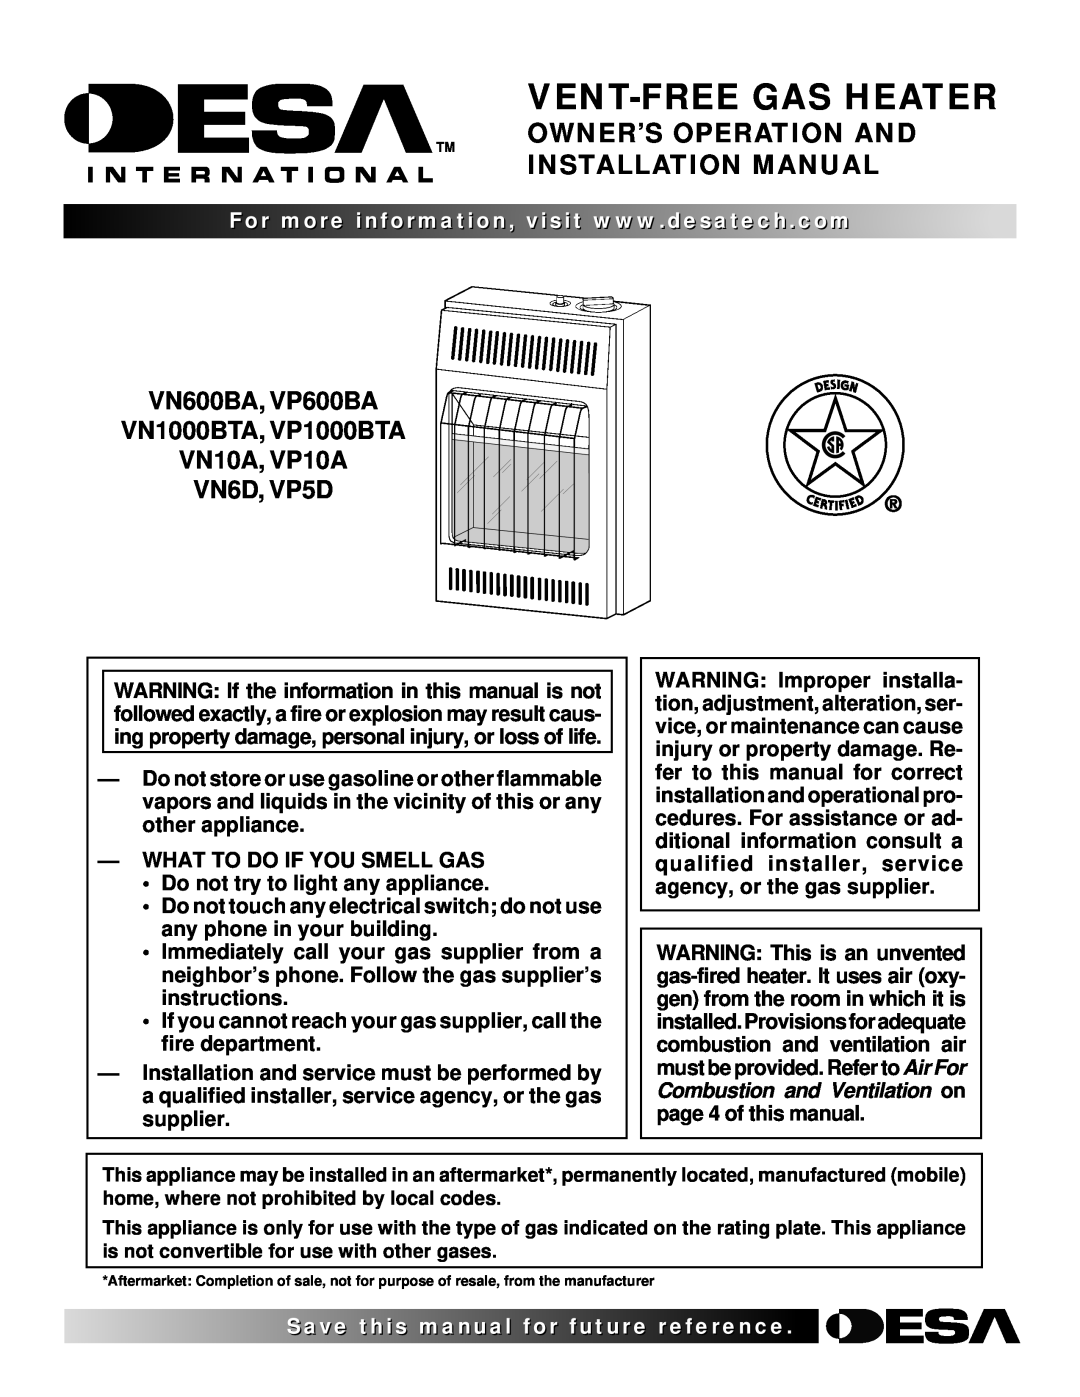 Desa VP1000BTA VN10A, VP10A installation manual What To Do If You Smell Gas, Do not try to light any appliance 